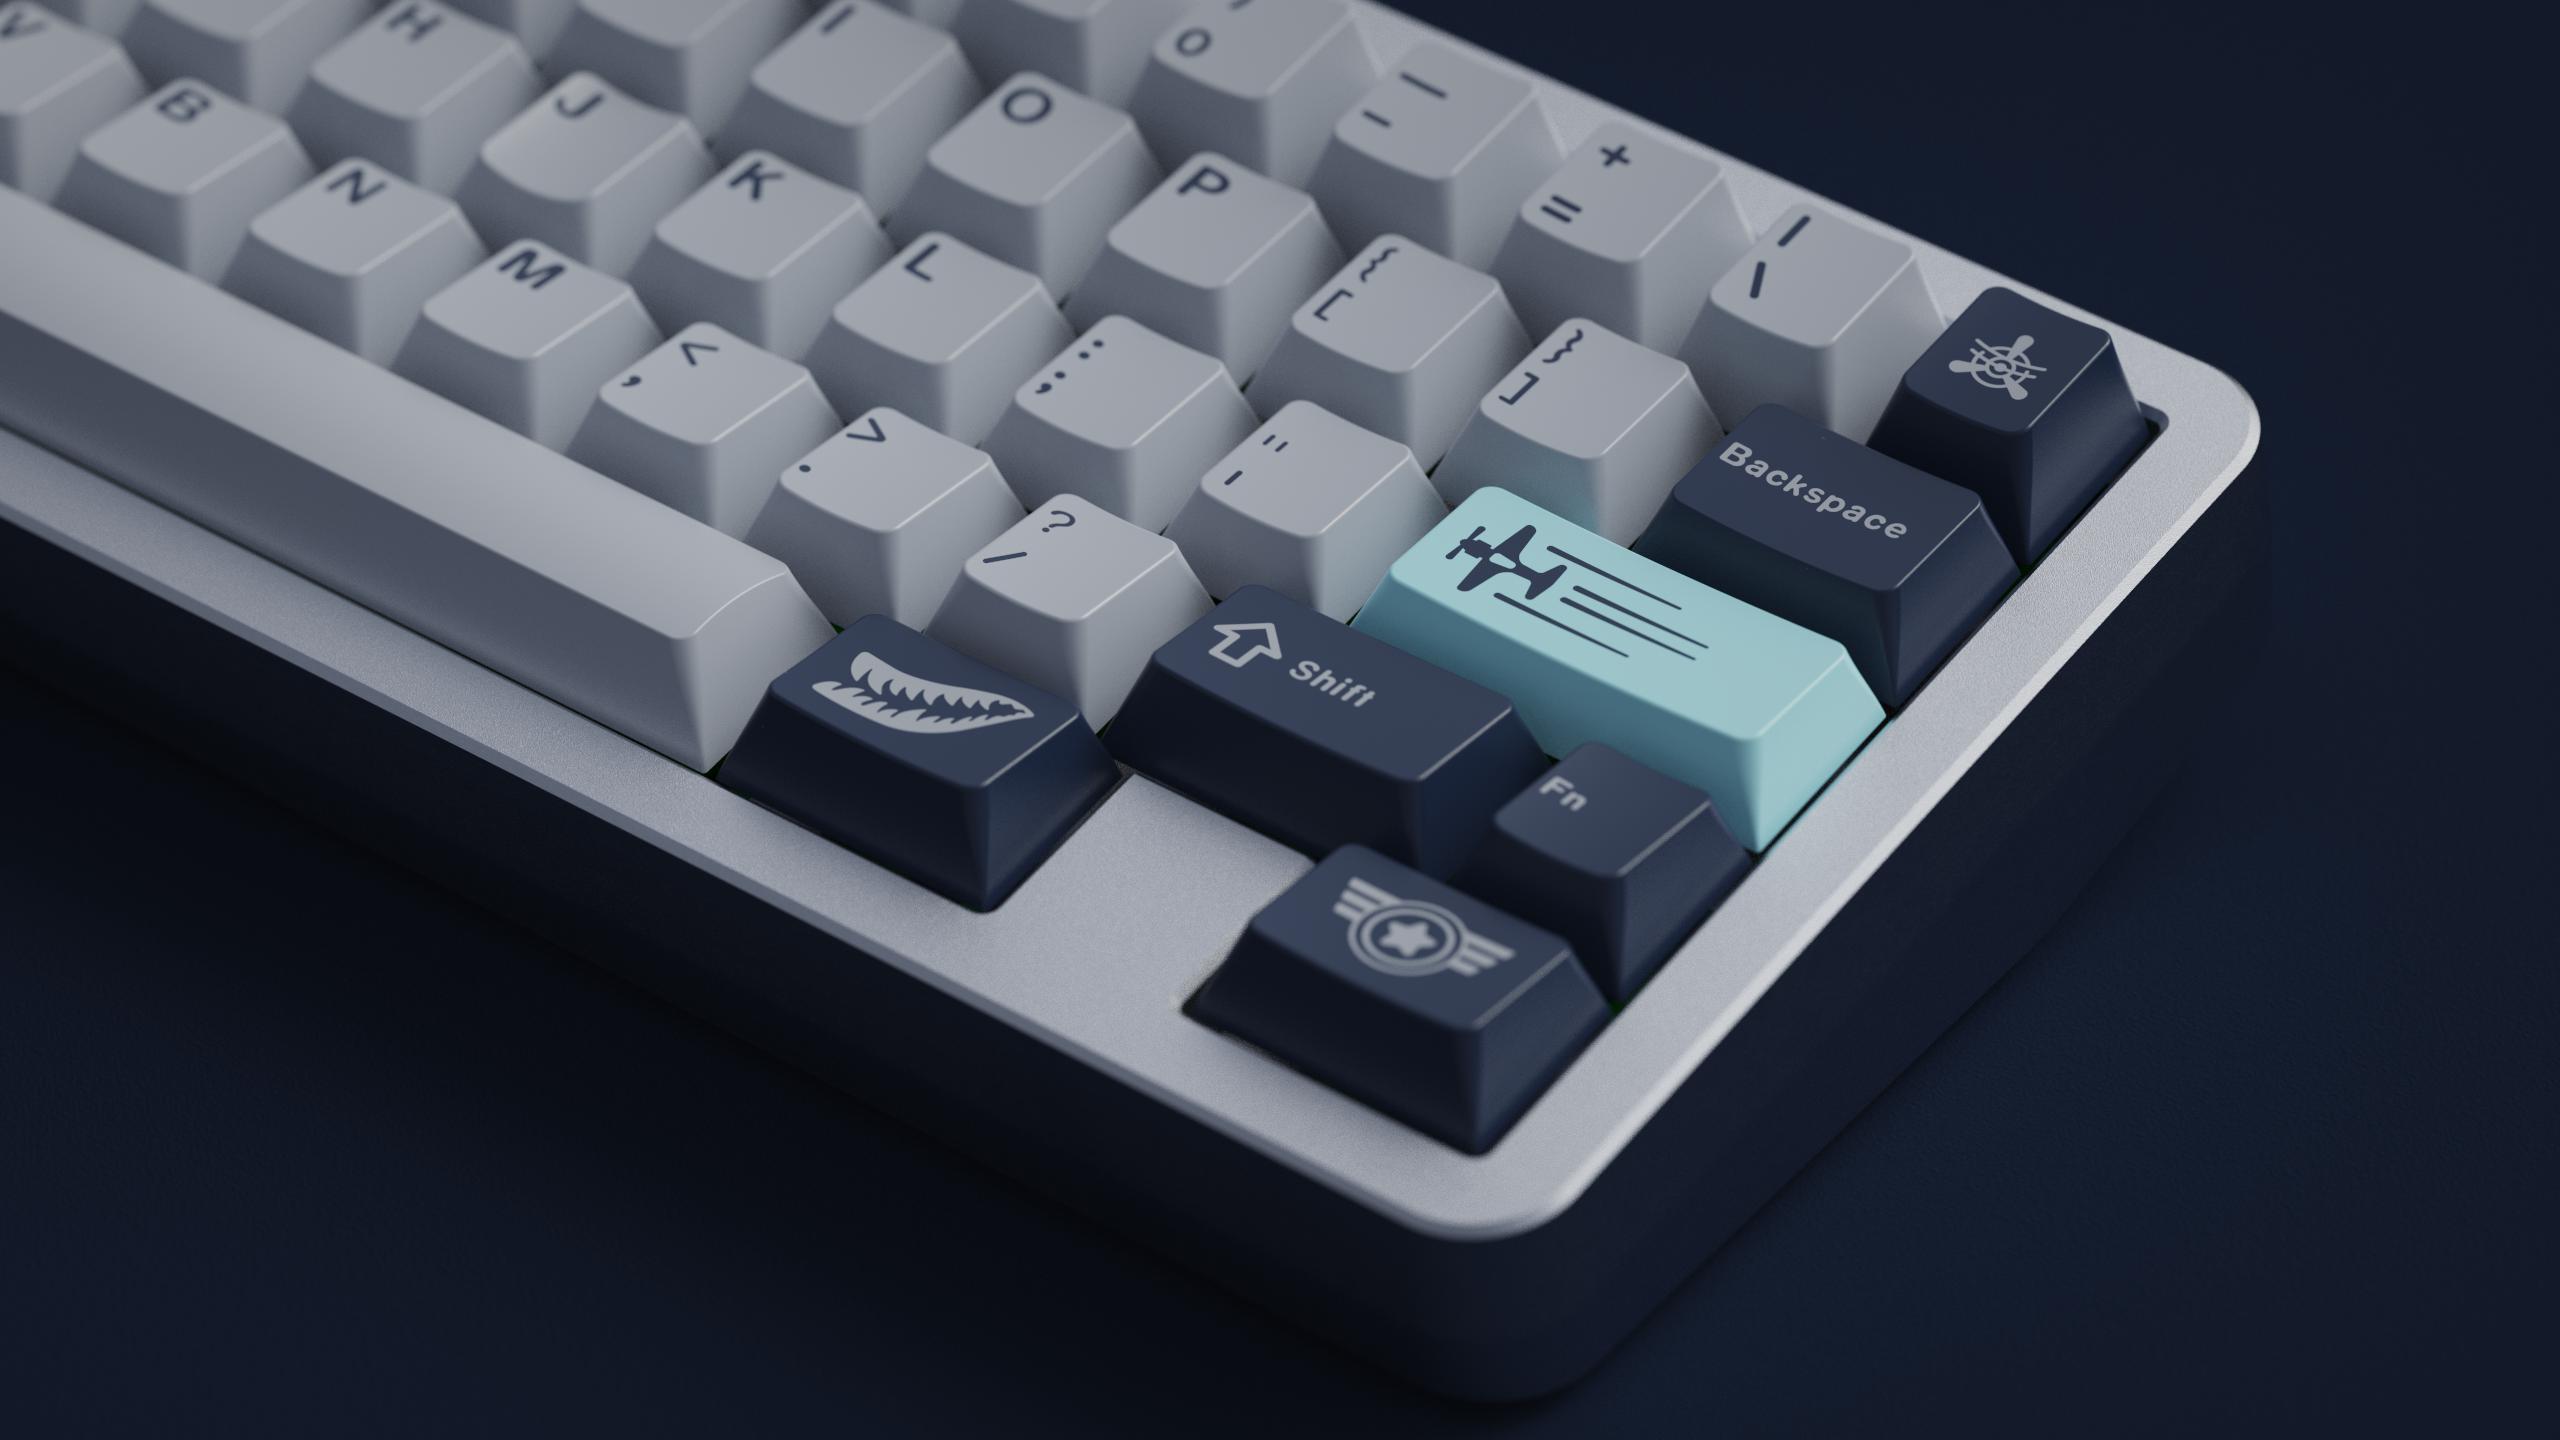 GMK CYL Pacific Keycaps-Space Cables-gmk keycaps-gmk keyboard-custom keycaps-keycaps-keyboard keycaps